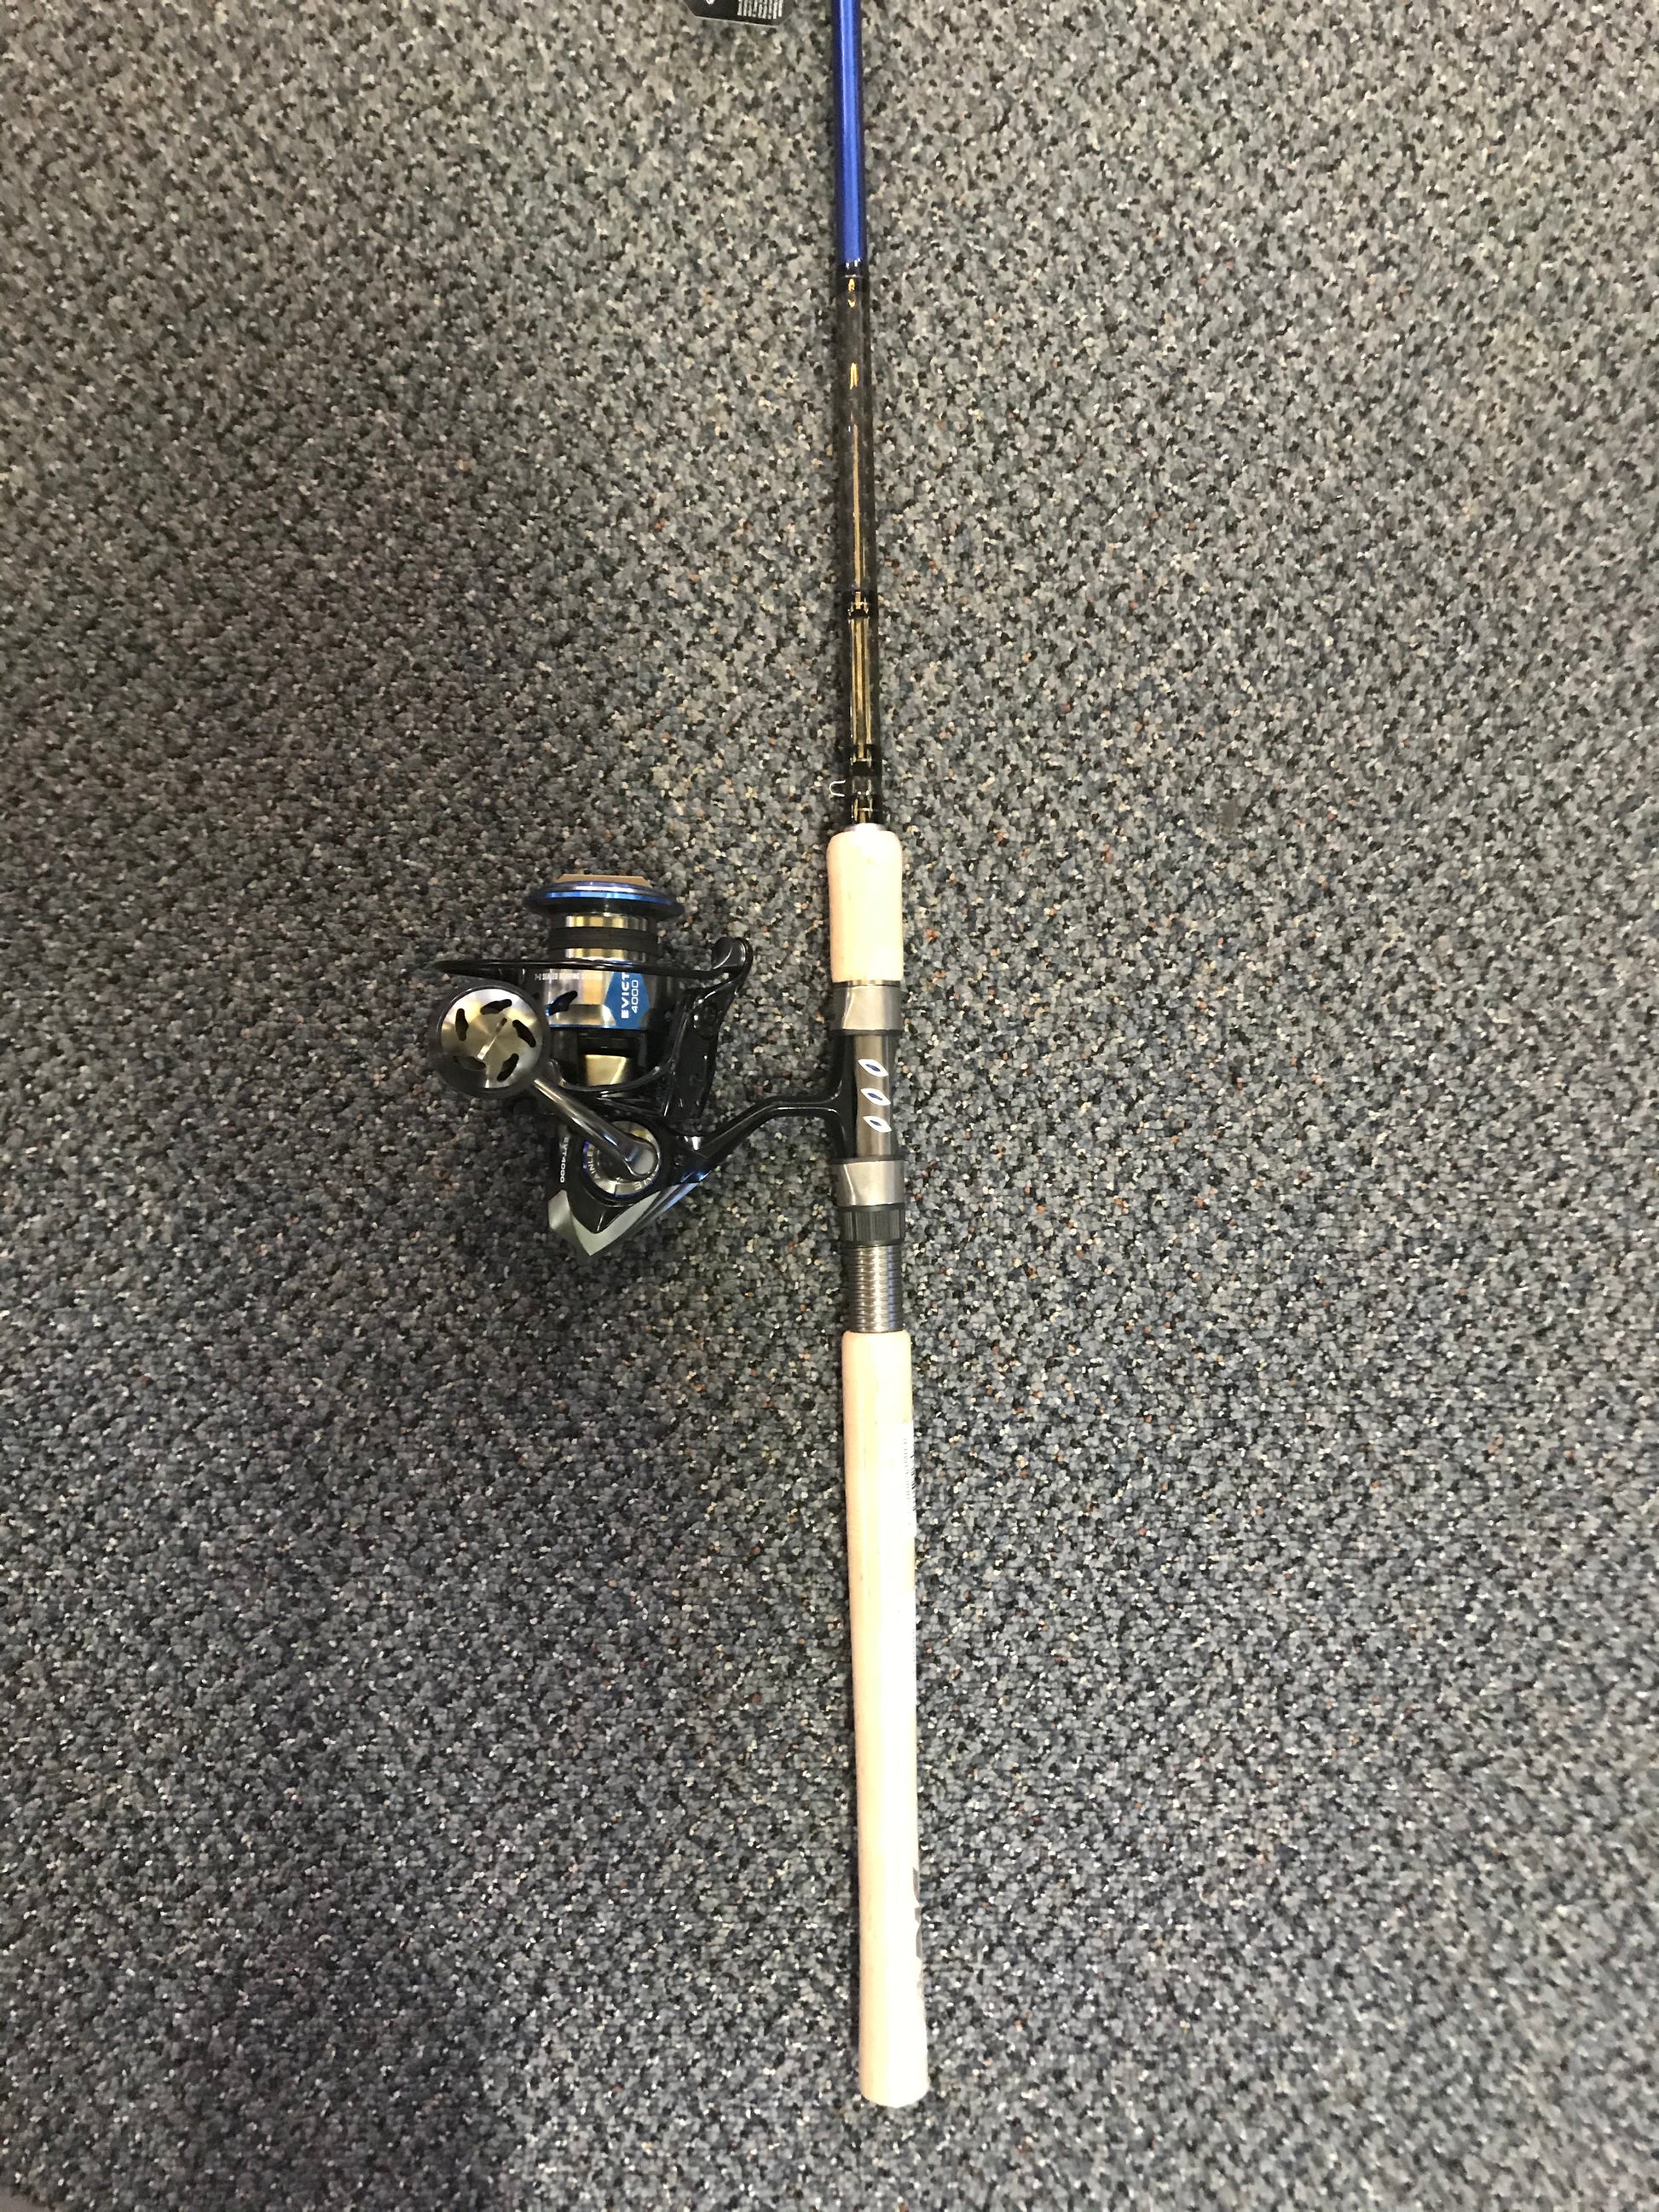 Which Shimano spinning reel for bottom fishing?